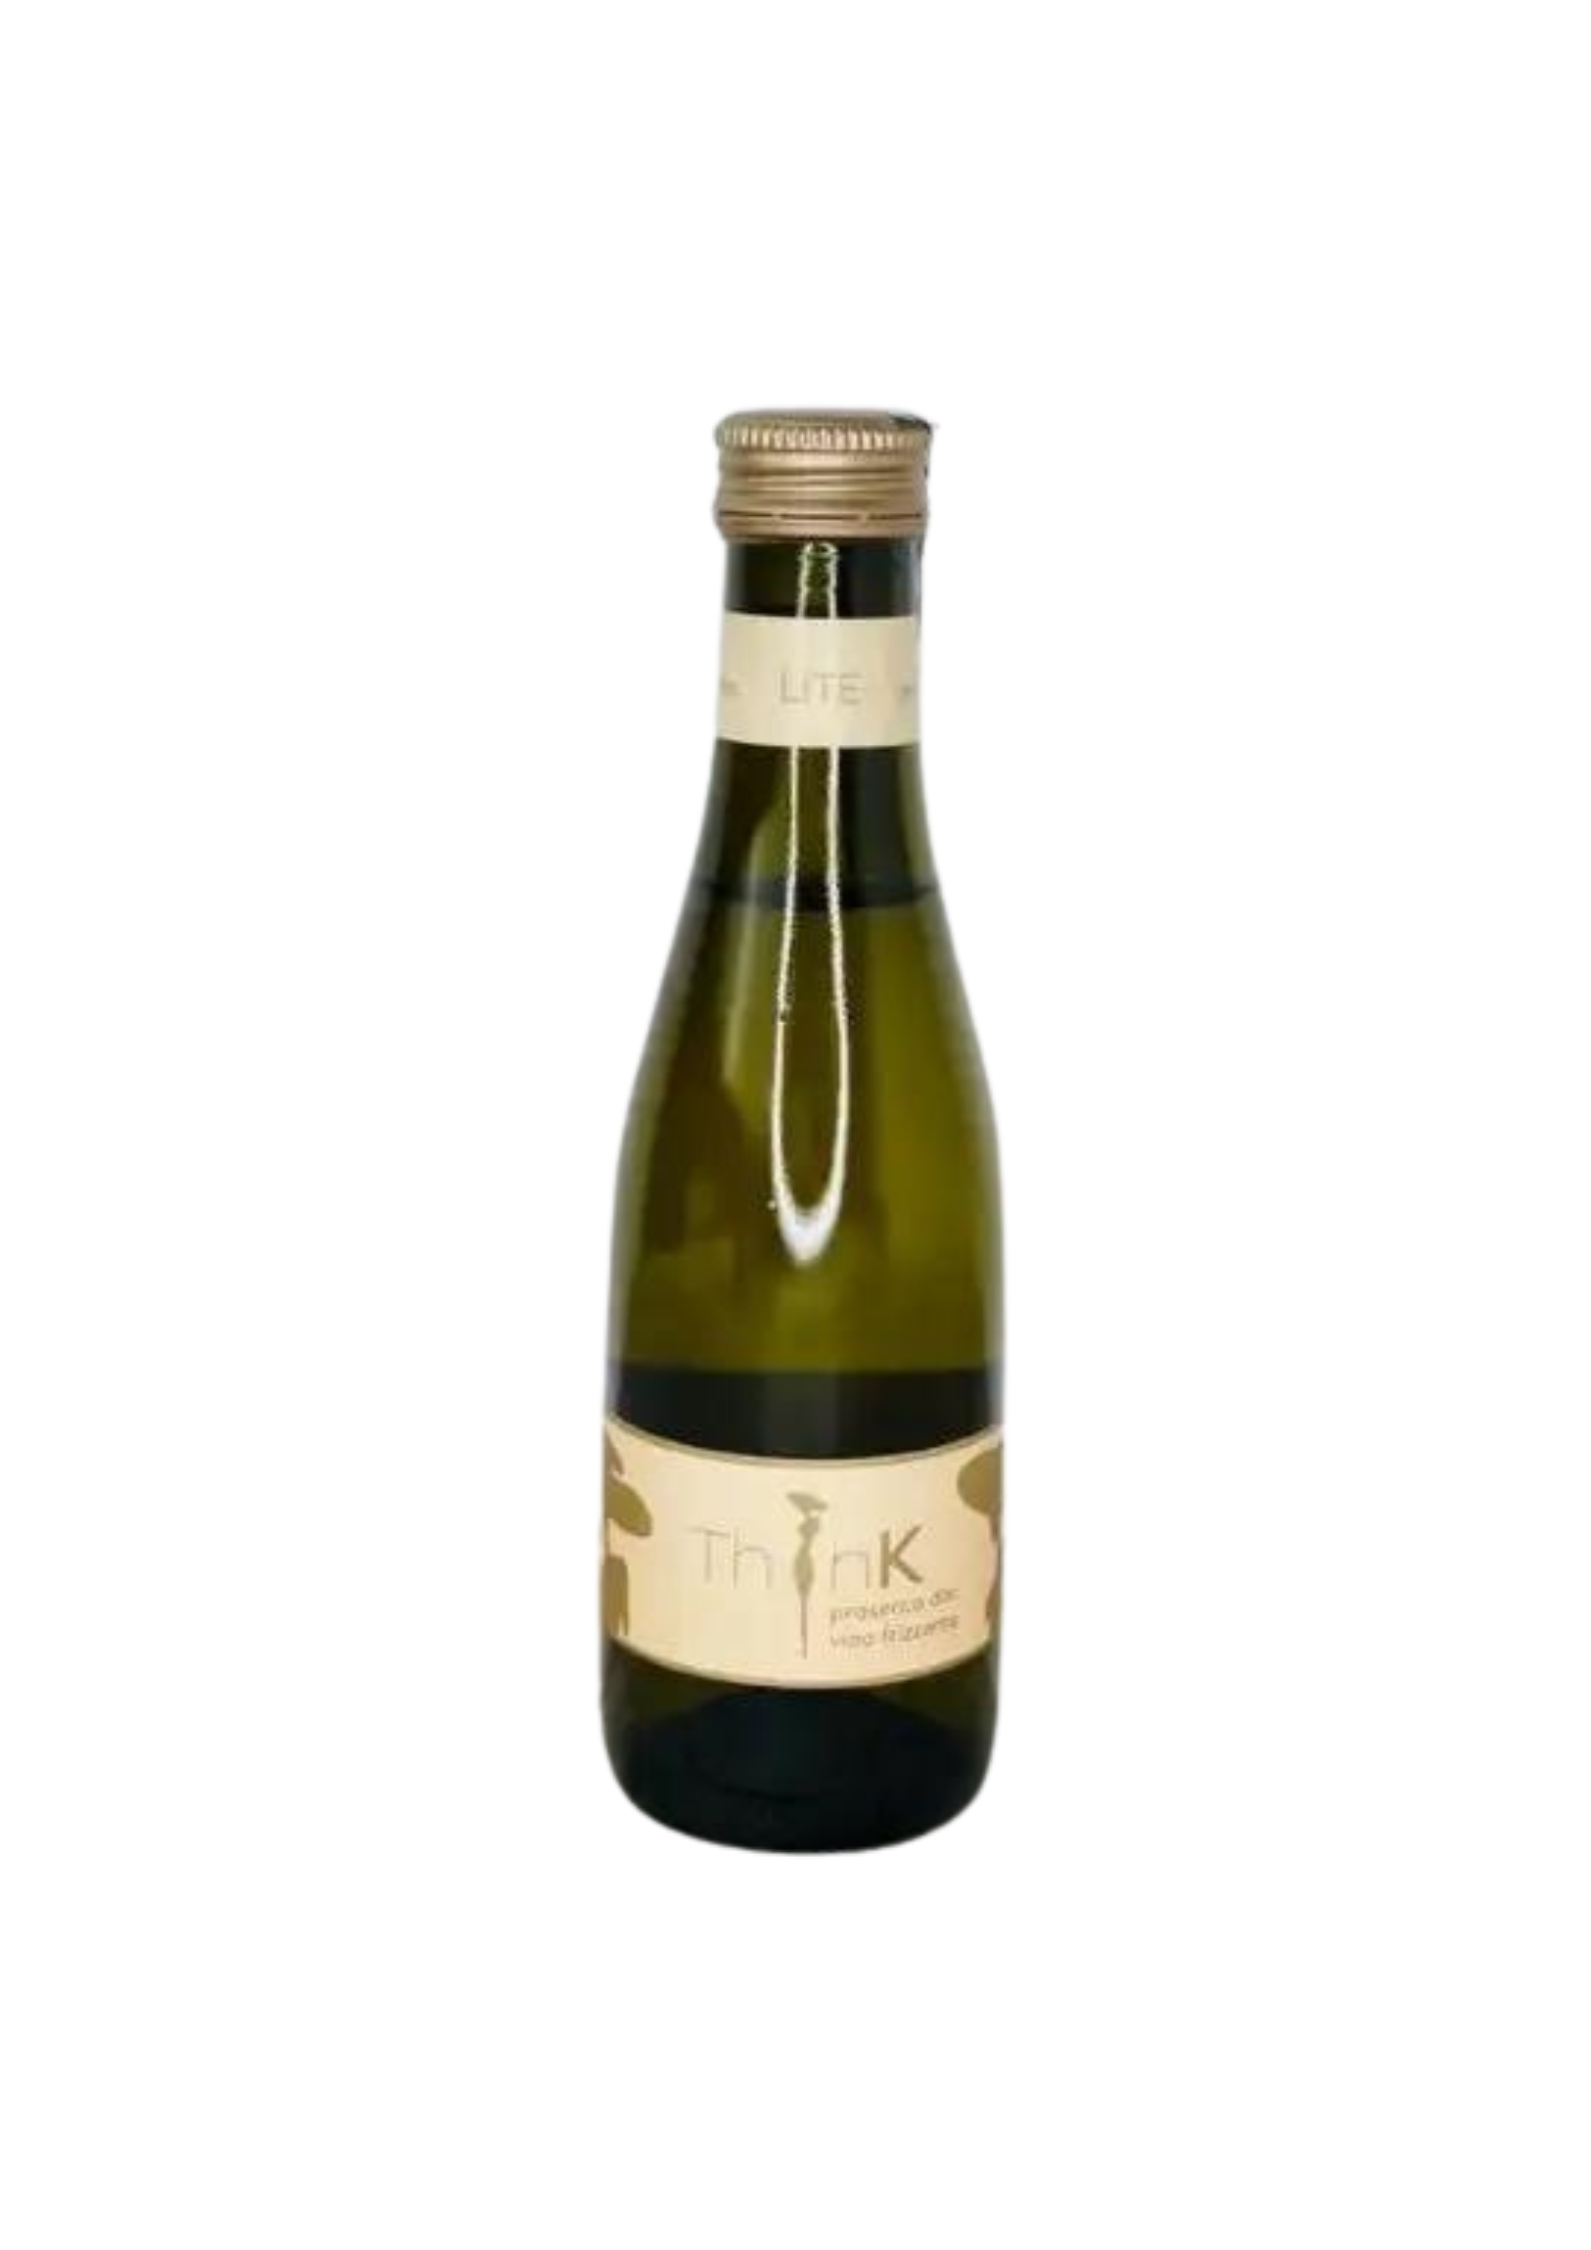 <h2>Miniature Bottle of Organic and Vegan Prosecco</h2>
<br>
<ul>
<li>200ml Bottle of sparkling Prosecco - 11%</li>
<li>Calories: 124 kcal per bottle</li>
<li>Attach your own personal message</li>
<li>This product contains alcohol and as such should only be bought for someone over the age of 18</li>
<li>For delivery area coverage see below</li>
</ul>
<br>
<h2>Gift Delivery Coverage</h2>
<p>Our shop delivers flowers and gifts to the following Liverpool postcodes L1 L2 L3 L4 L5 L6 L7 L8 L11 L12 L13 L14 L15 L16 L17 L18 L19 L24 L25 L26 L27 L36 L70 If your order is for an area outside of these we can organise delivery for you through our network of florists. We will ask them to make as close as possible to the image but because of the difference in stock and sundry items, it may not be exact.</p>
<br>
<h2>Alcohol Gifts</h2>
<p>As a licensed florist, we are able to supply alcoholic drinks either as a gift on their own or with flowers. We have carefully selected a range that we know you will love either as a gift in itself or to provide that extra bit of celebratory luxury to a floral gift.</p>
<p>Add a fashionable tipple to the celebratory mood with this Organic, and Vegan Prosecco.</p>
<p>ThinK Prosecco is not only vegan and organic but it is also a sparkling wine with both reduced sugar and calories. ThinK vegan Prosecco is made from the finest Glera grapes from the heart of Treviso, north-east Italy. ThinK Prosecco have developed a Prosecco that is fresh, satisfying, luxurious and tastes ‘just that little bit better’.</p>
<p>This is a lovely miniature addition to your bouquet of flowers to celebrate a special occasion.</p>
<p><strong>THIS ITEM WILL NEED TO ACCOMPANY A FLOWER ORDER OR BE A COMBINATION OF EXTRA ITEMS TO REACH OUR MINIMUM ORDER OF £30</strong></p>
<br>
<h2>Online Gift Ordering | Online Gift Delivery</h2>
<p>Through this website you can order 24 hours, Booker Gifts and Gifts Liverpool have put together this carefully selected range of Flowers, Gifts and Finishing Touches to make Gift ordering as easy as possible. This means even if you do not live in Liverpool we make it easy for you to see what you are getting when buying for delivery in Liverpool.</p>
<br>
<h2>Liverpool Flower and Gift Delivery</h2>
<p>We are open 7 days a week and offer advanced booking flower delivery, same-day flower delivery, Guaranteed AM Flower Delivery and also offer Sunday Flower Delivery.</p>
<p>Our florists Deliver in Liverpool and can provide flowers for you in Liverpool, Merseyside. And through our network of florists can organise flower deliveries for you nationwide.</p>
<br>
<h2>Beautiful Gifts Delivered | Best Florist in Liverpool</h2>
<p>Having been nominated the Best Florist in Liverpool by the independent Three Best Rated for the 5th year running you can feel secure with us</p>
<p>You can trust Booker Gifts and Gifts to deliver the very best for you.</p>
<br>
<h2>5 Star Google Review</h2>
<p><em>So Pleased with the product and service received. I am working away currently, so ordered online, and after my own misunderstanding with online payment, I contacted the florist directly to query. Gemma was very prompt and helpful, and my flowers were arranged easily. They arrived this morning and were as impactful as the pictures on the website, and the quality of the flowers and the arrangement were excellent. Great Work! David Welsh</em></p>
<br>